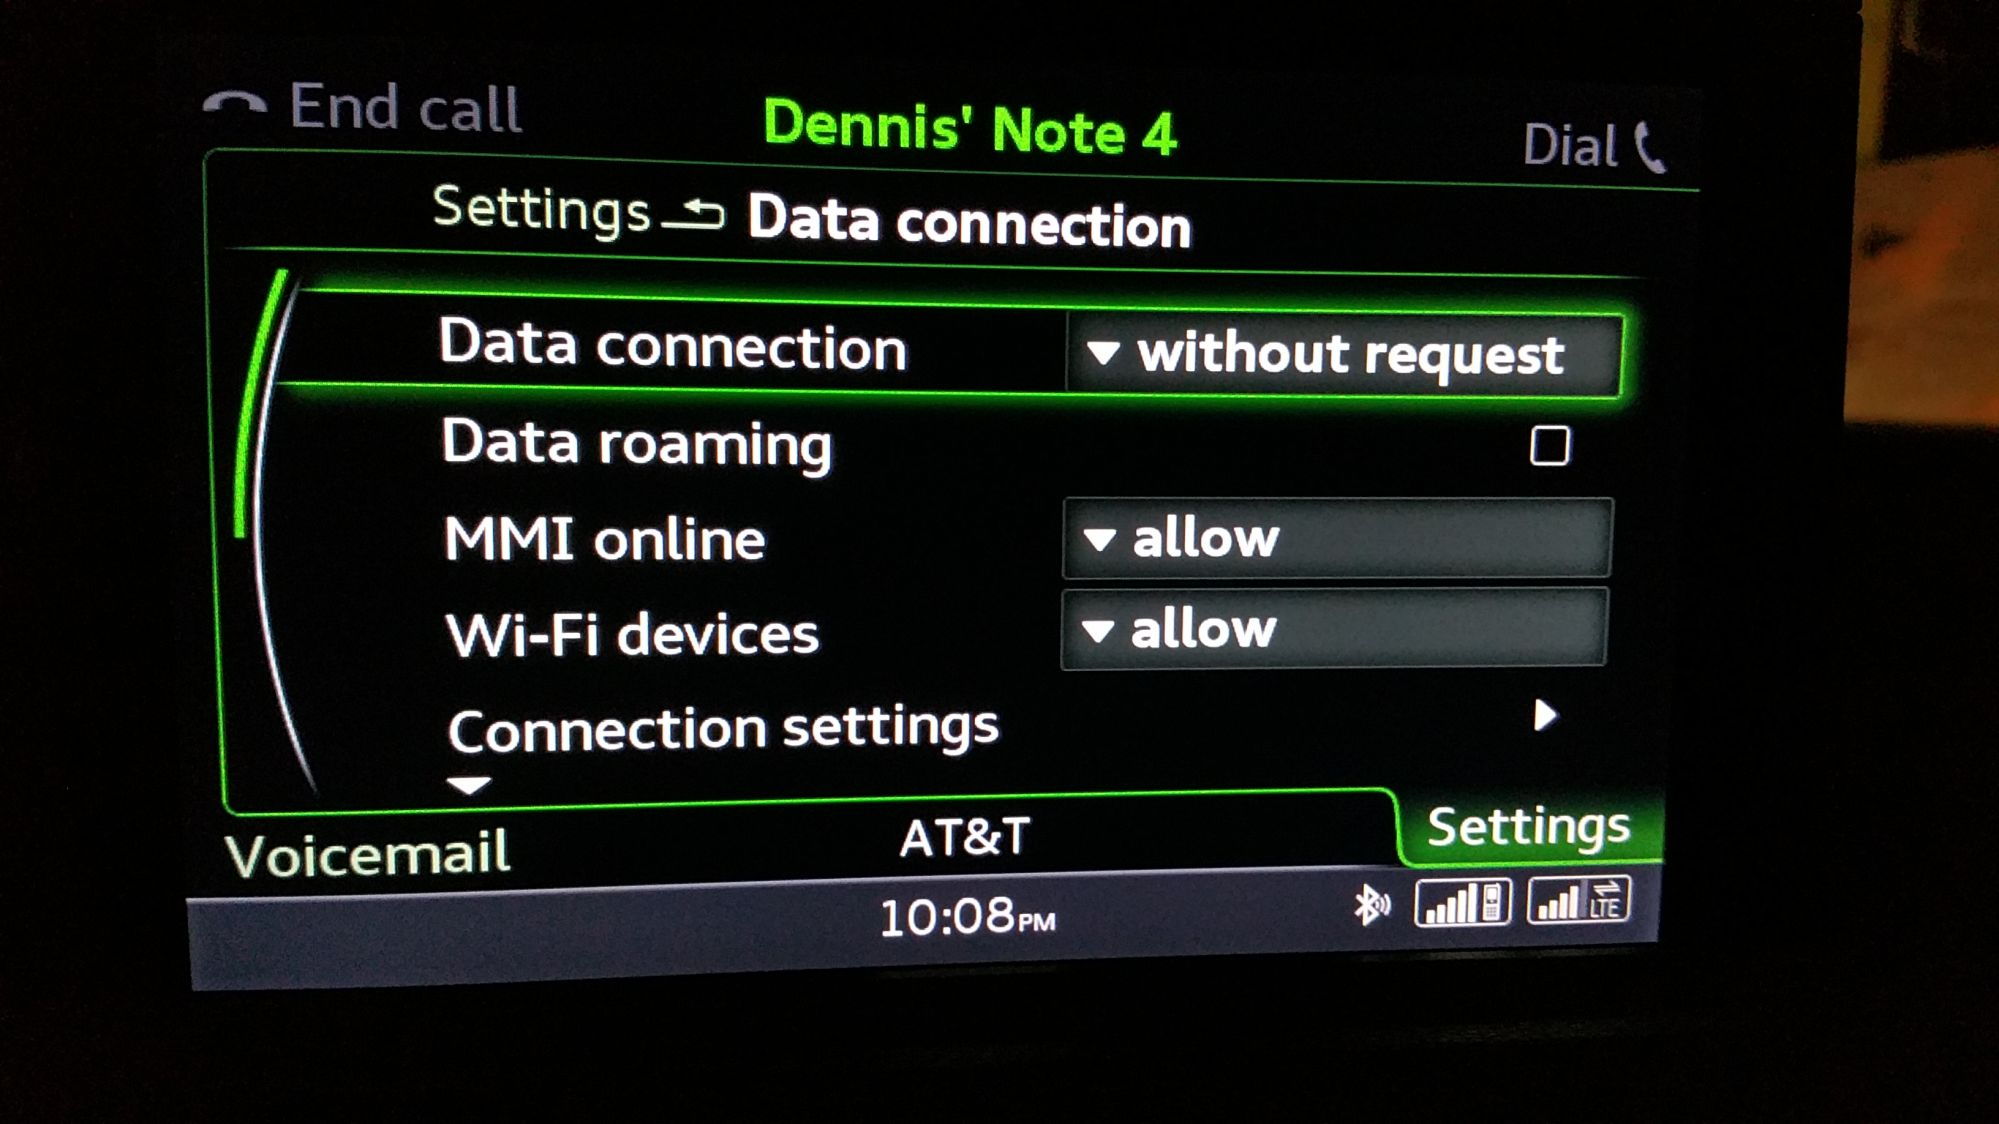 Go to the data connection menu under settings and set functions as shown.